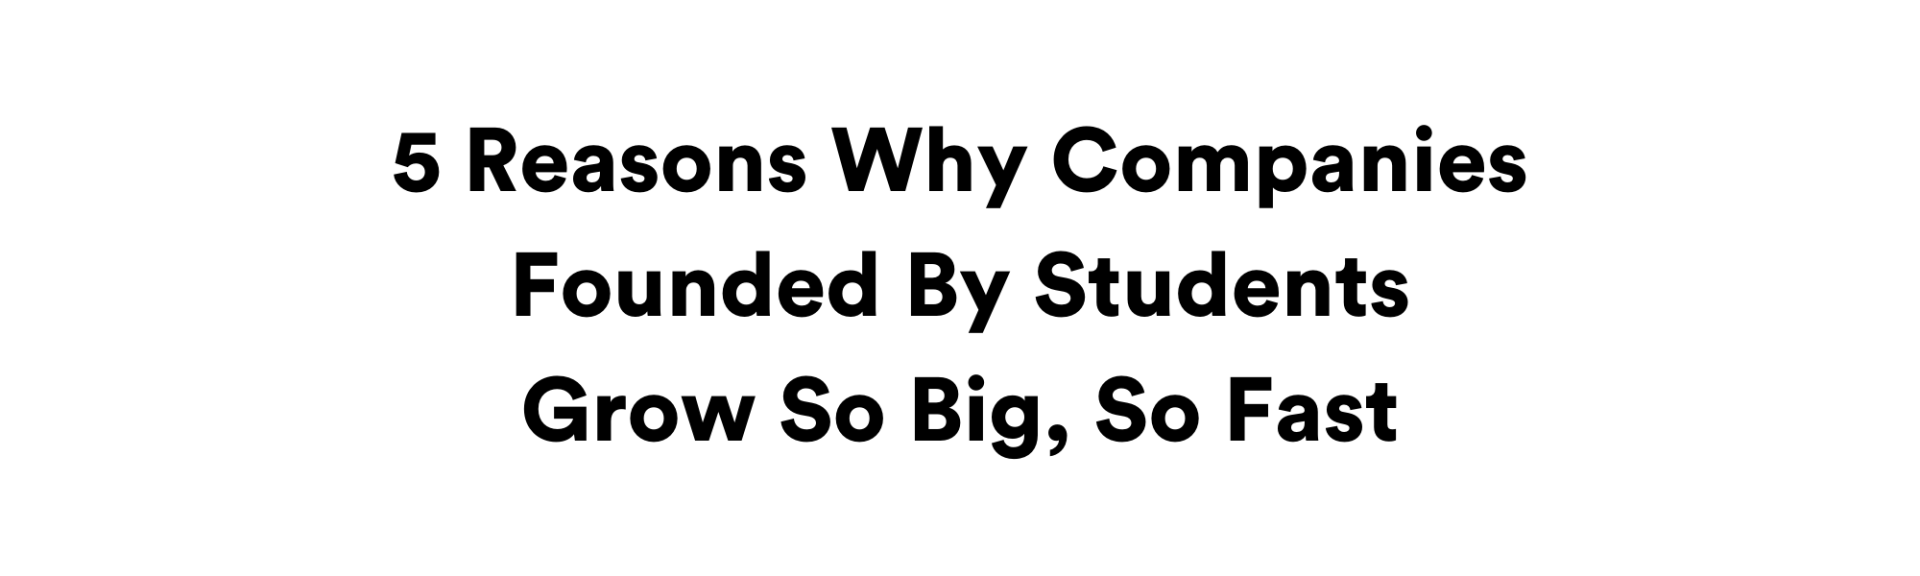 5 Reasons Why Companies Founded By Students Grow So Big, So Fast